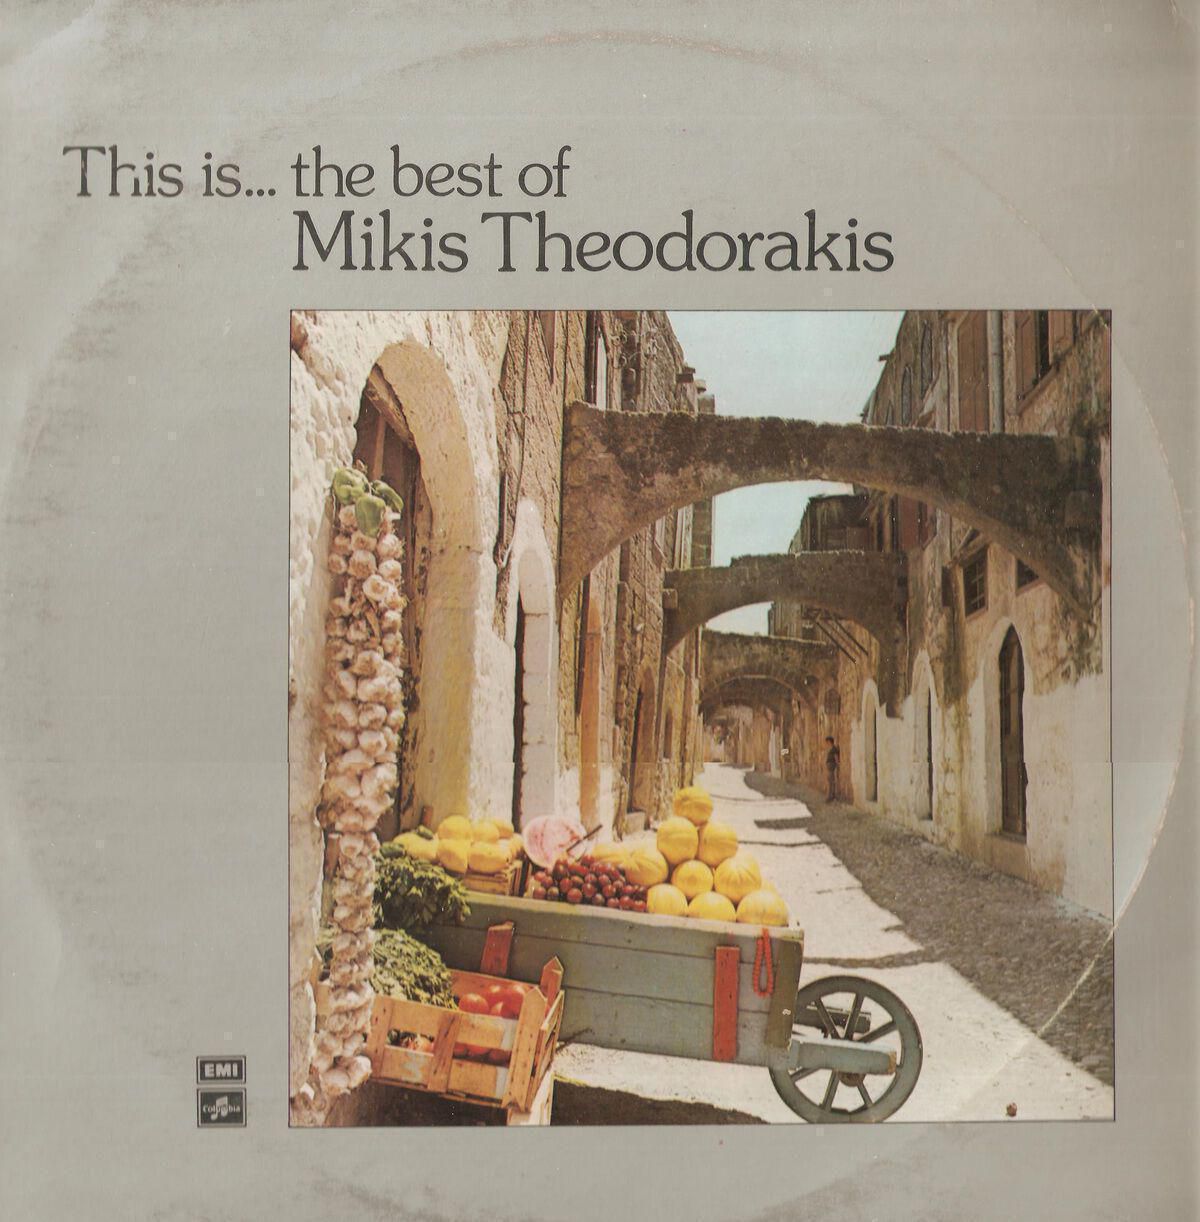 01.This is the best of Mikis